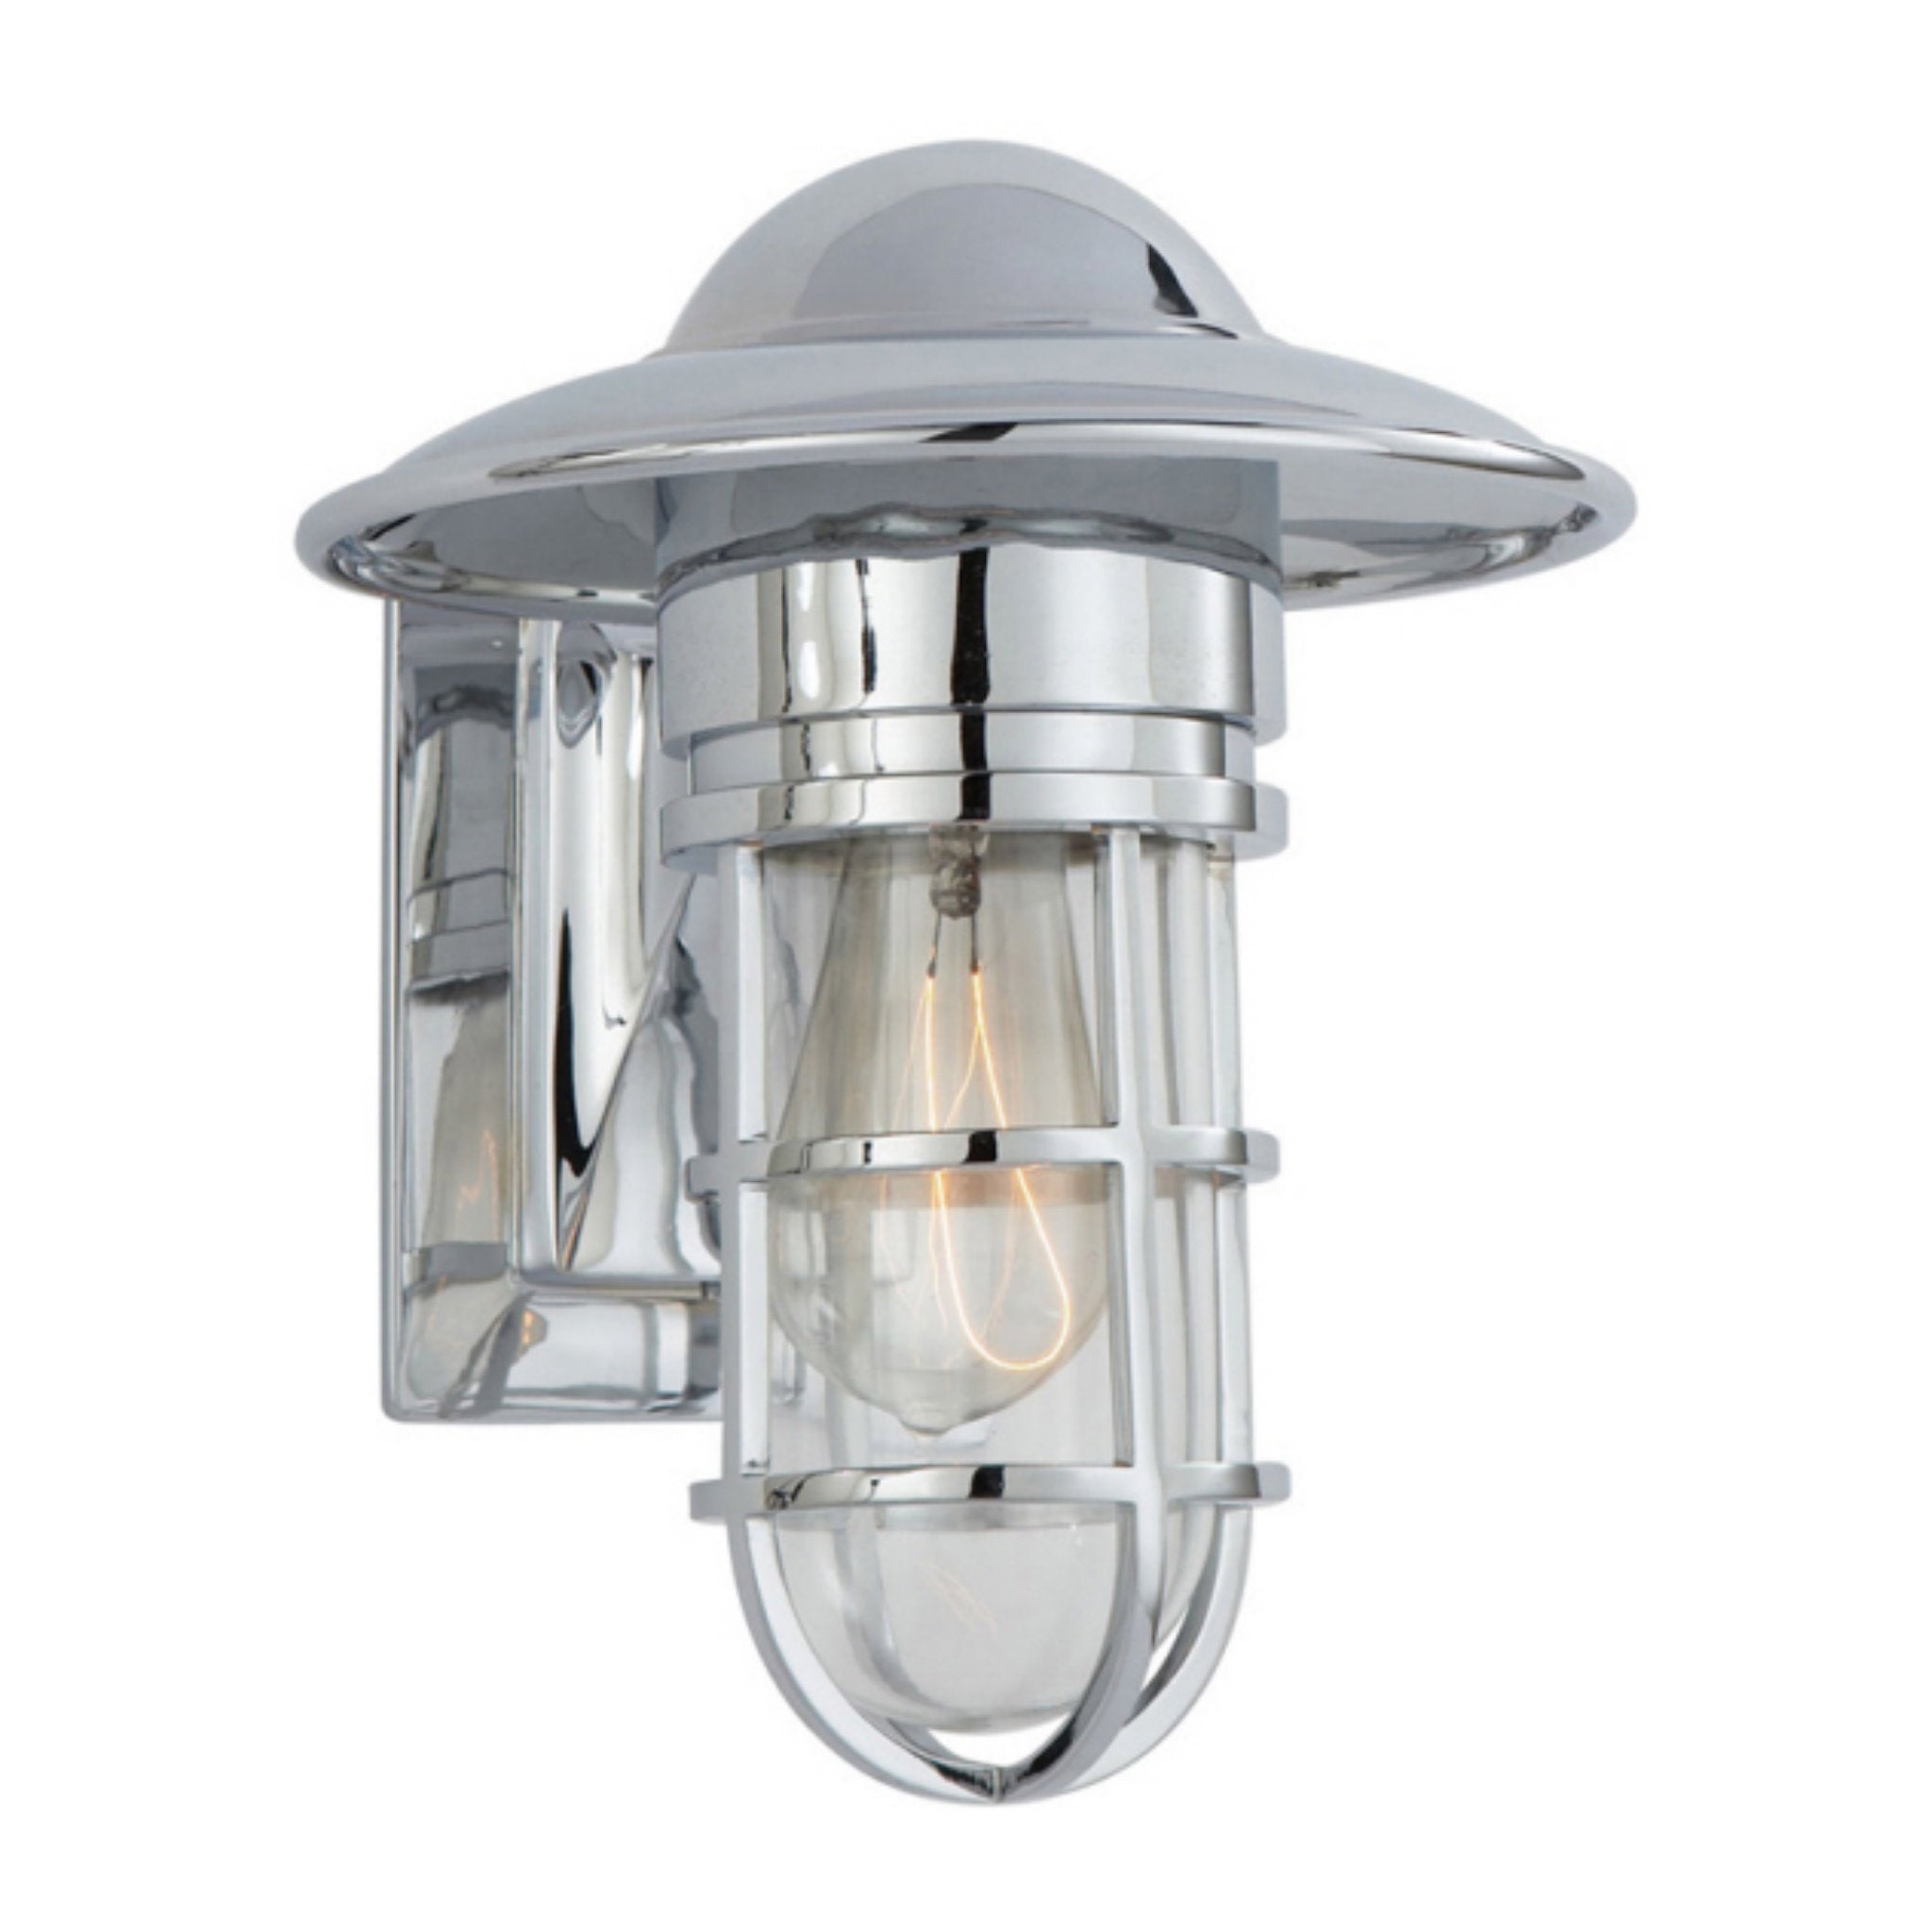 Chapman & Myers Marine Indoor/Outdoor Wall Light in Chrome with Clear Glass